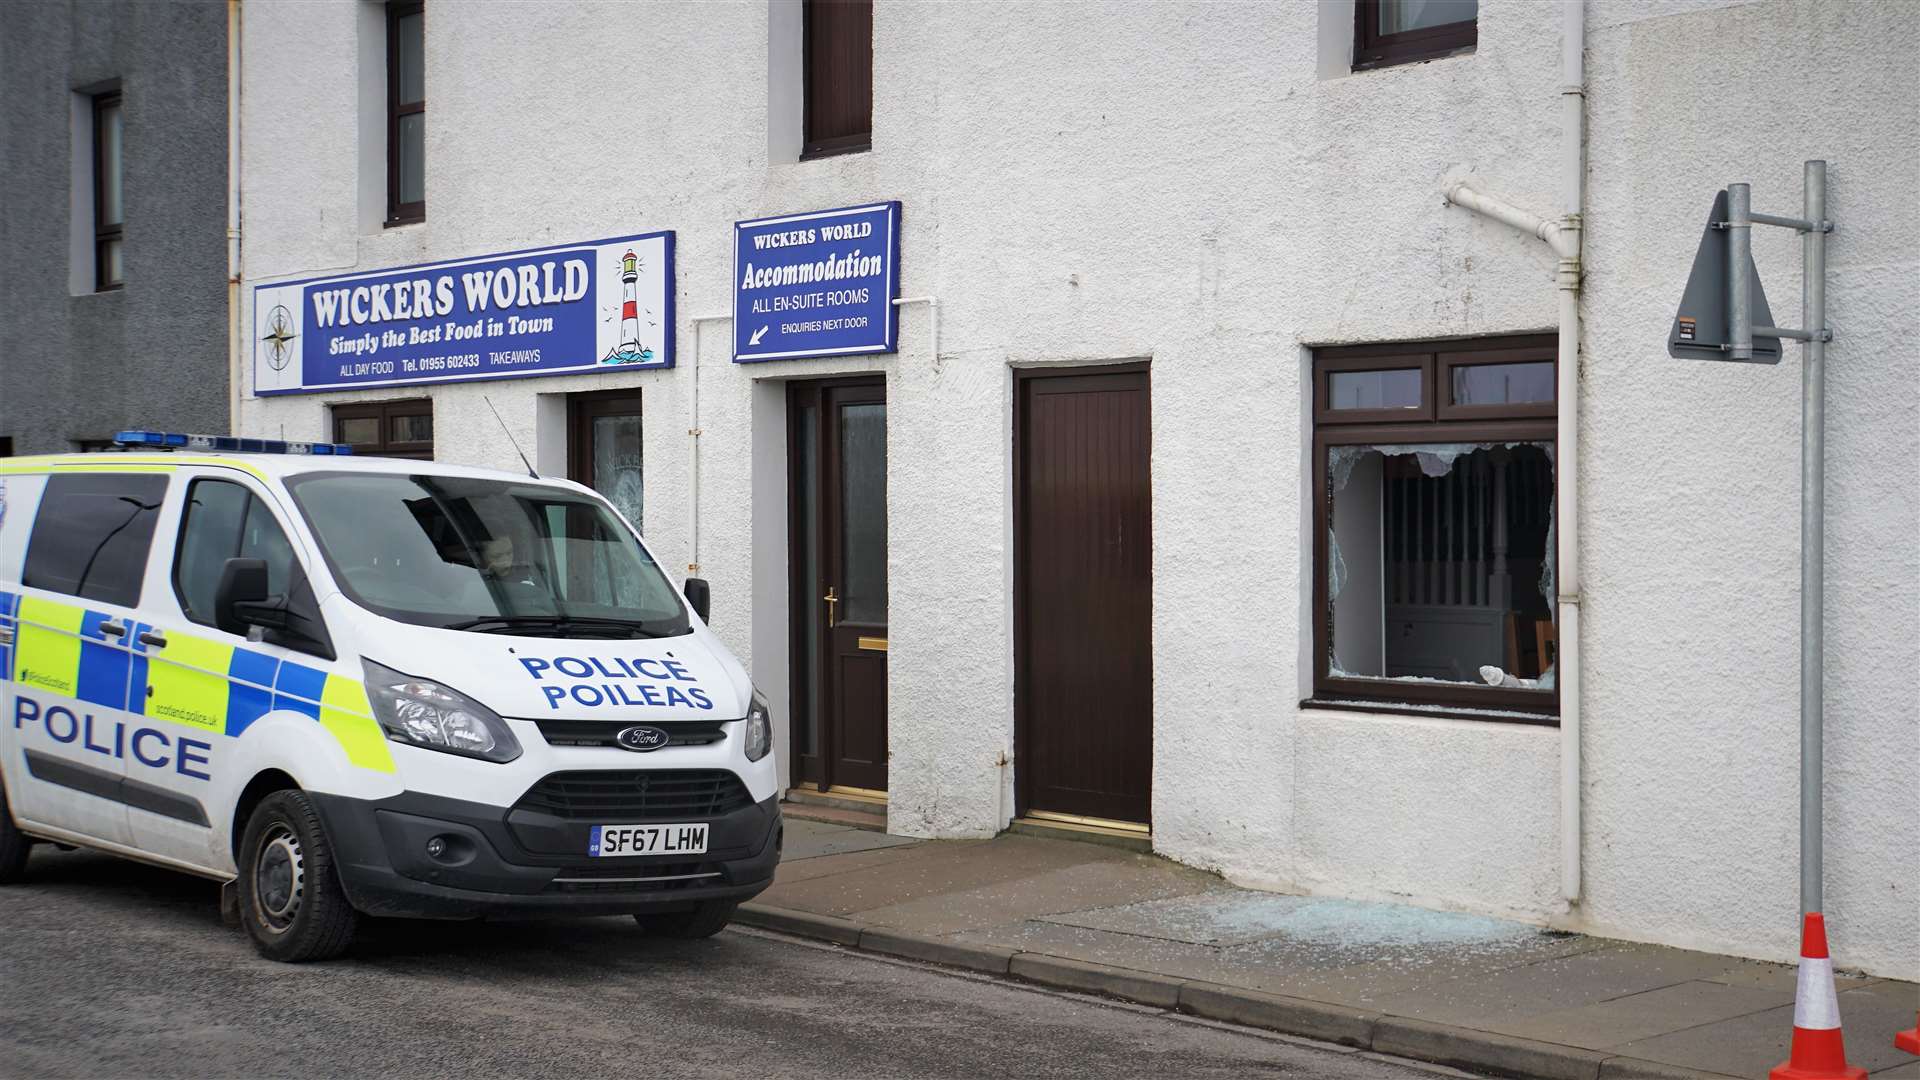 A police vehicle at the scene of the break-in at Wicker's World on March 13. Picture: DGS